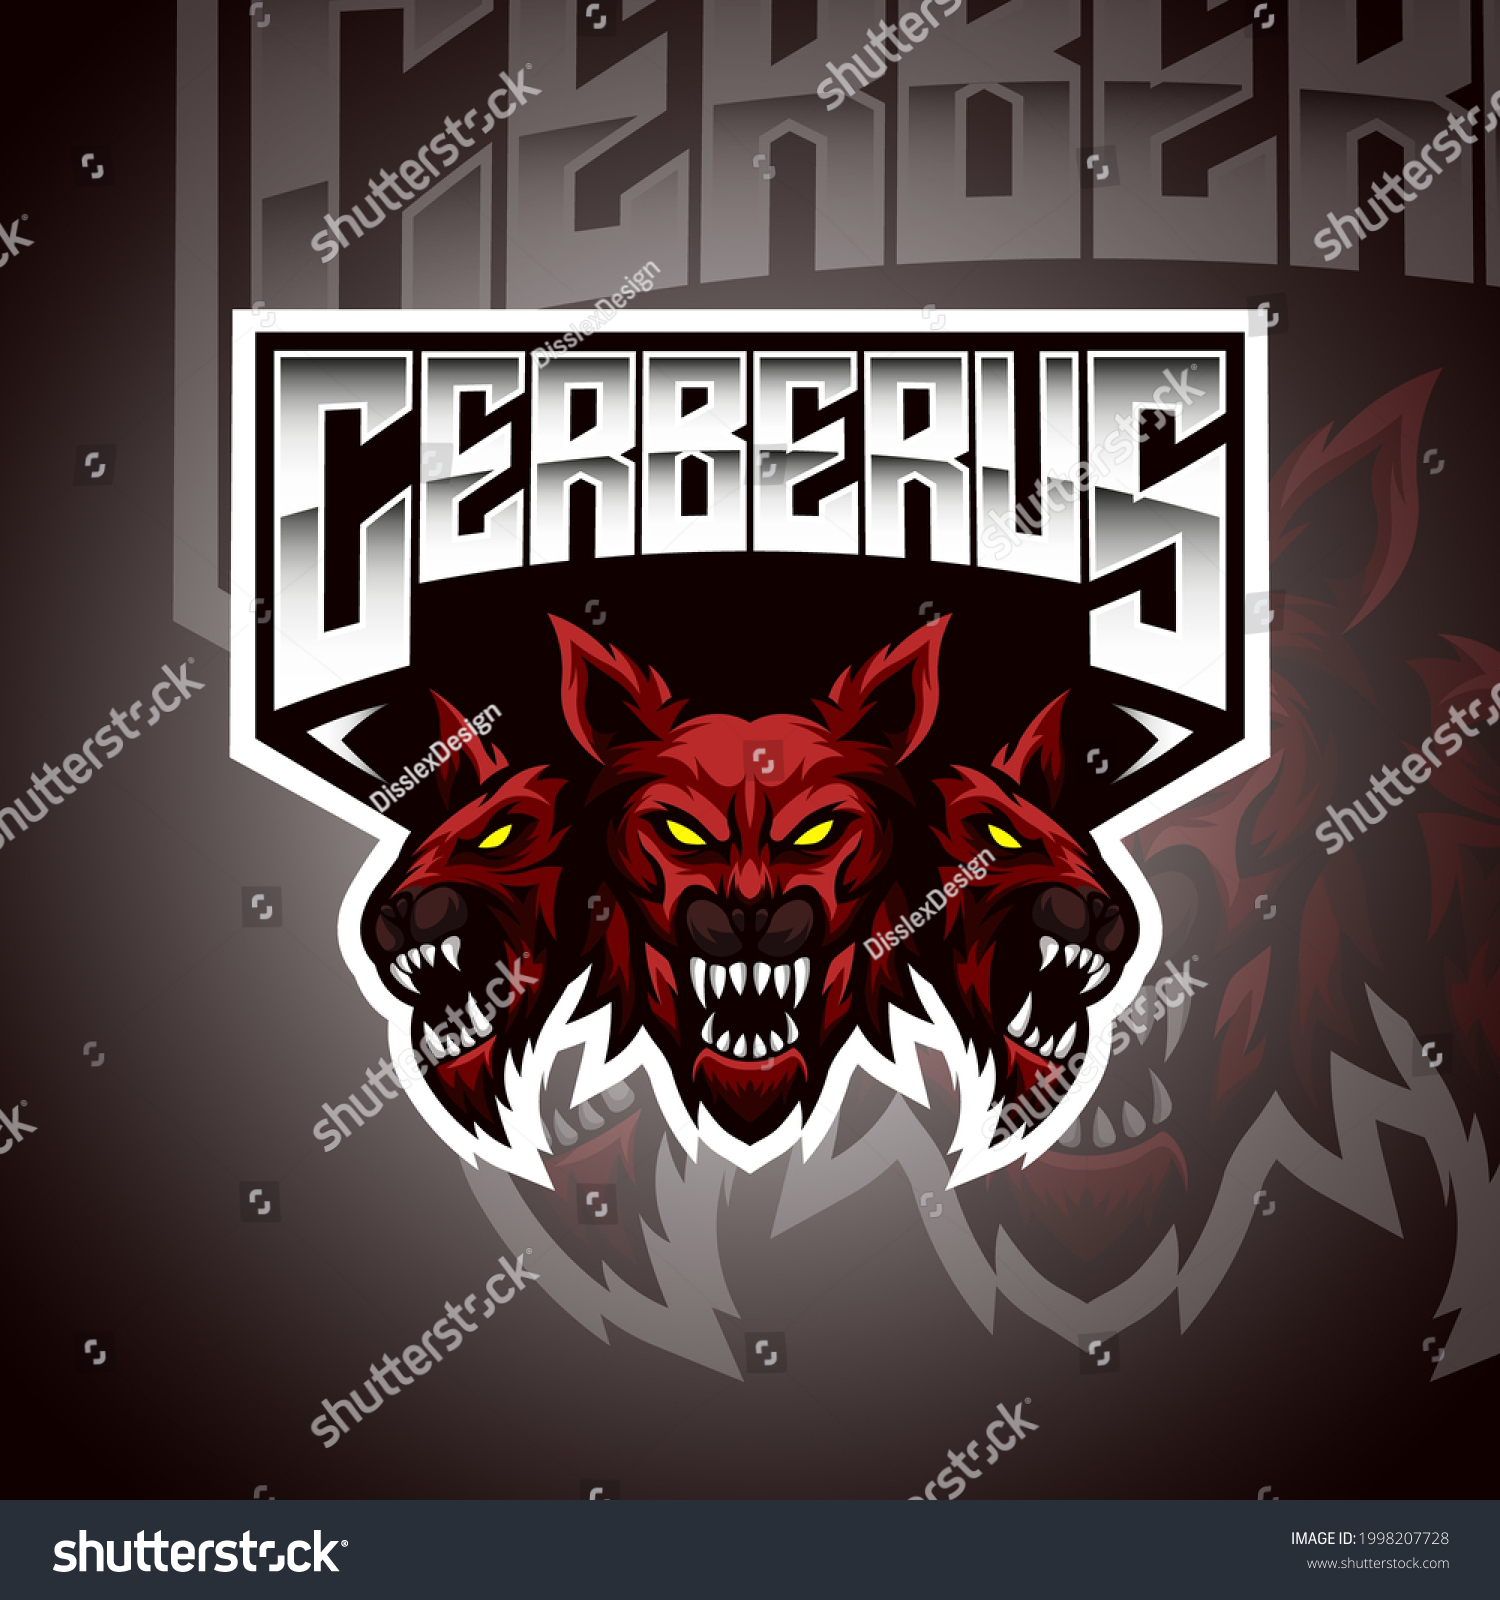 SVG of Vector illustration of cerberus, perfect for your team logo in esports, also can be used for t-shirts, tattoos, etc. svg